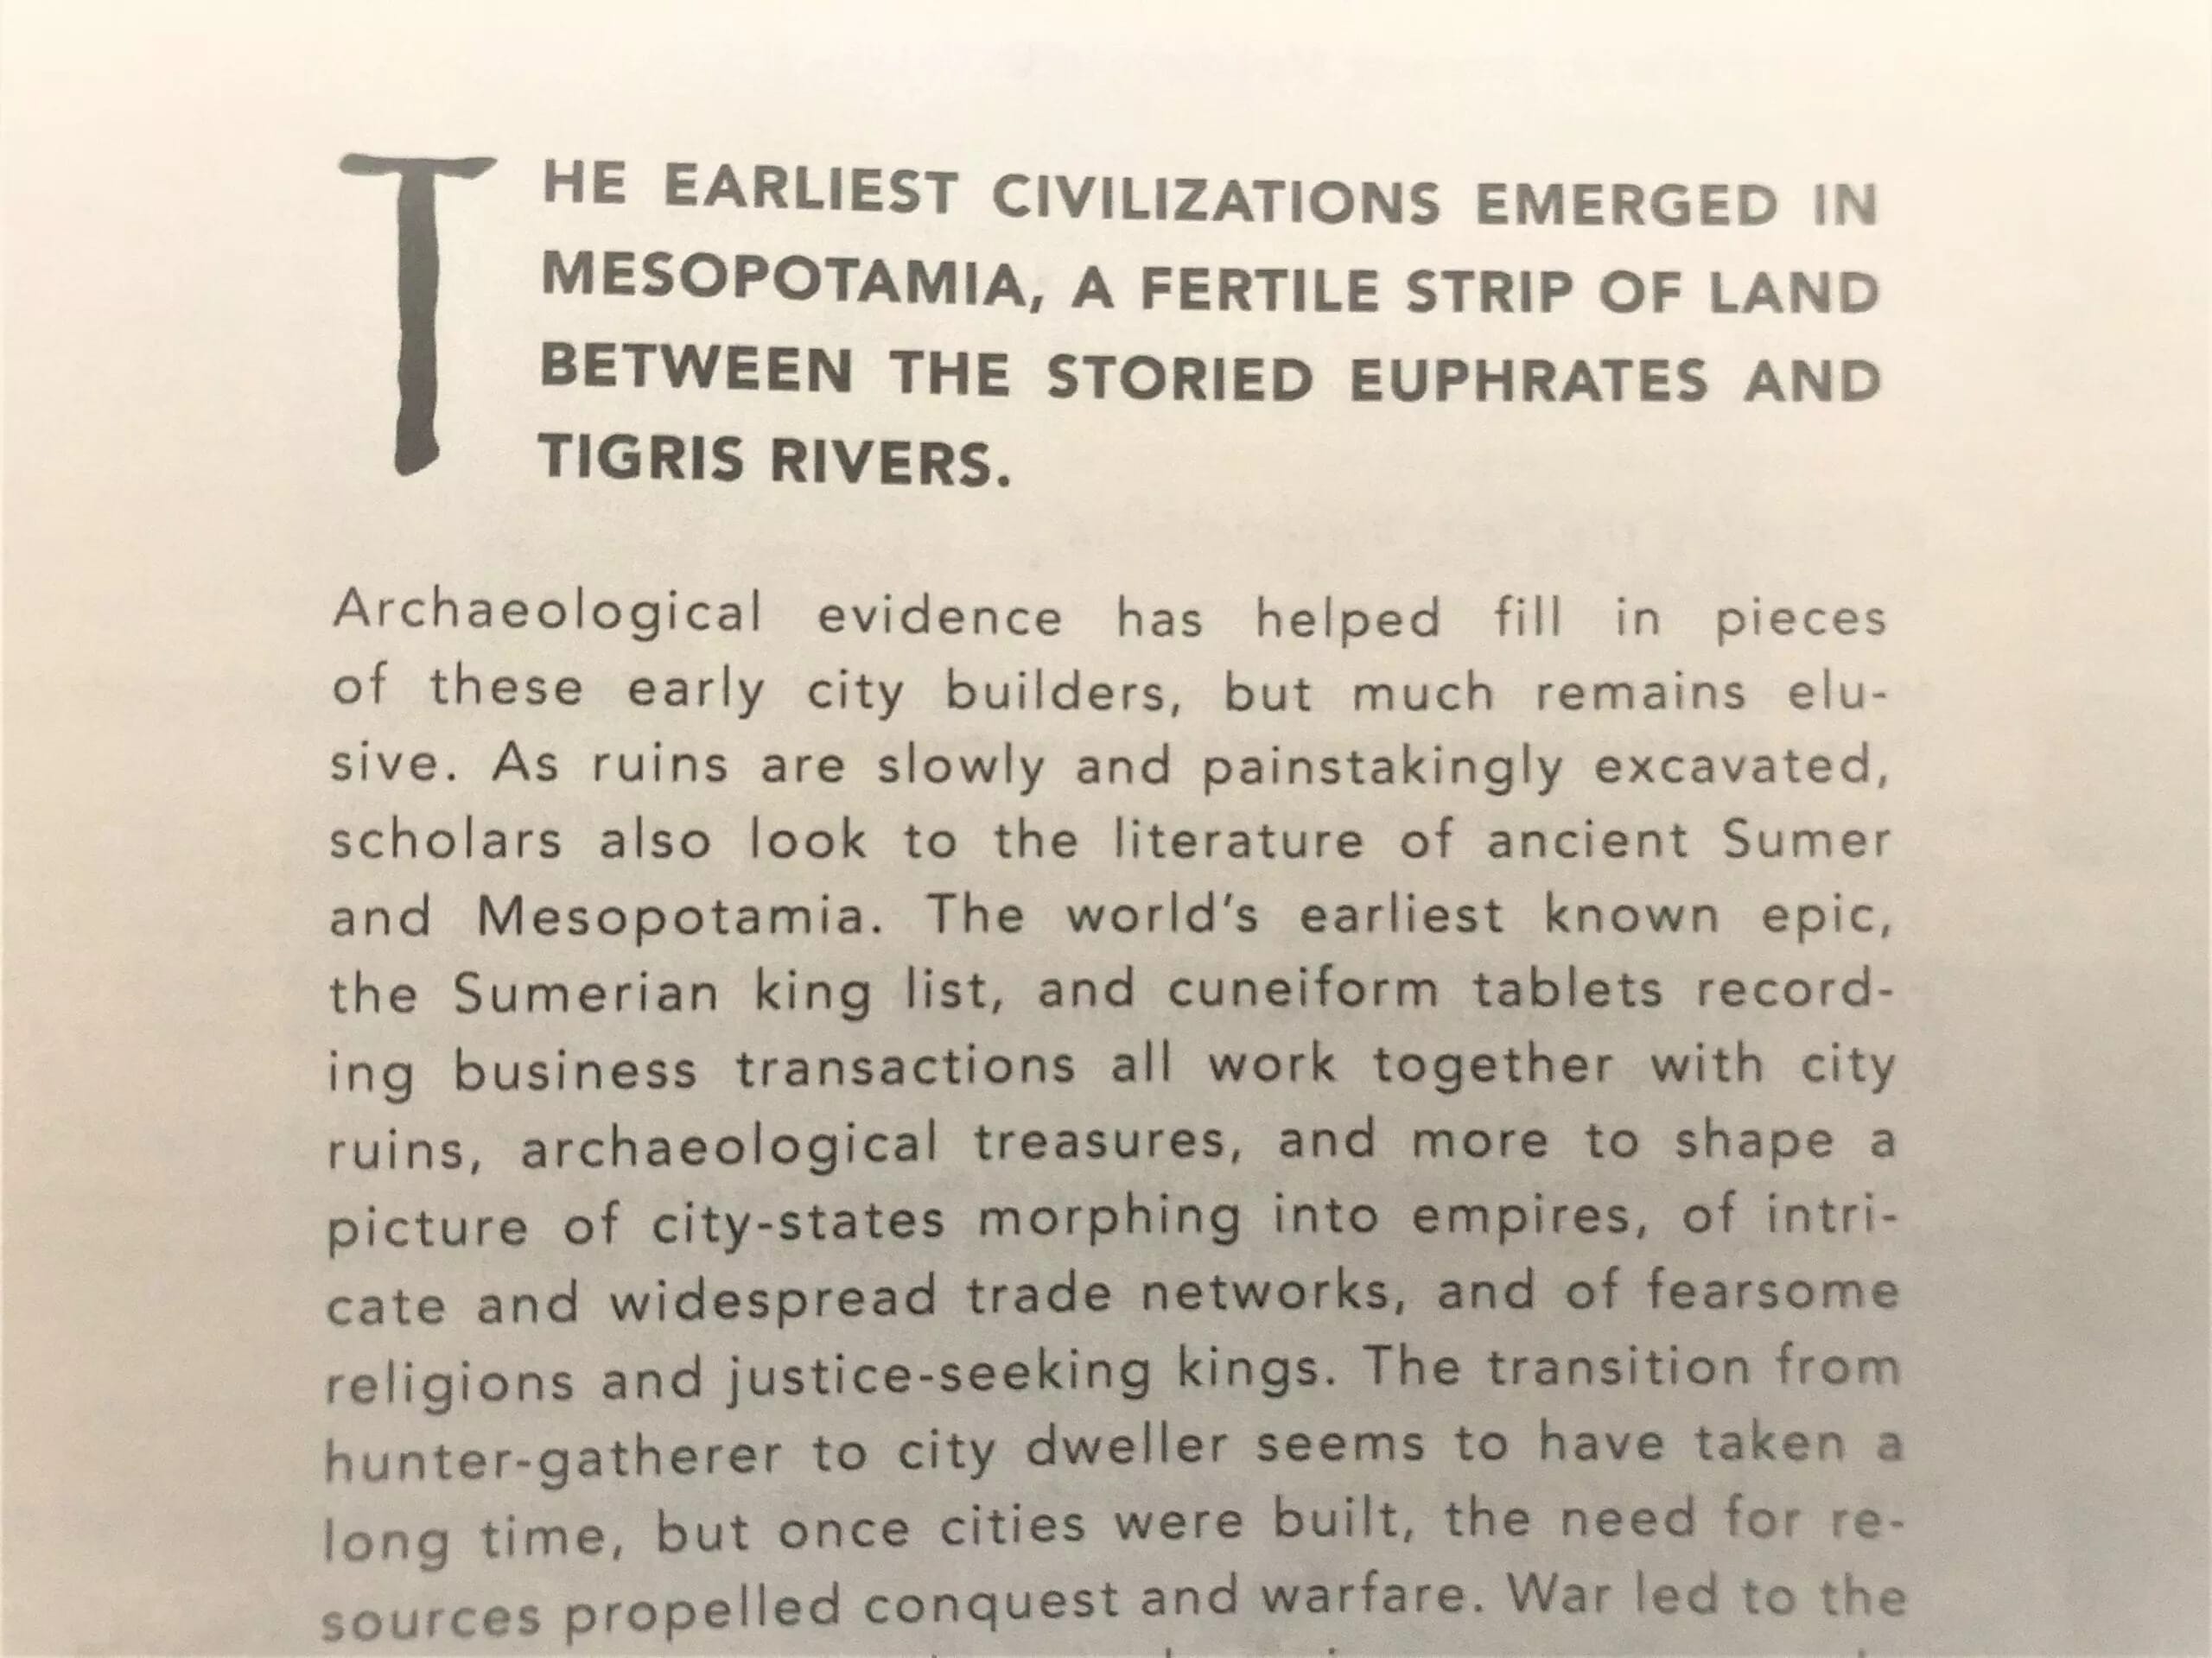 A little text in the guidebook helps students connect archeology with the literature curriculum for a fuller understanding of history.